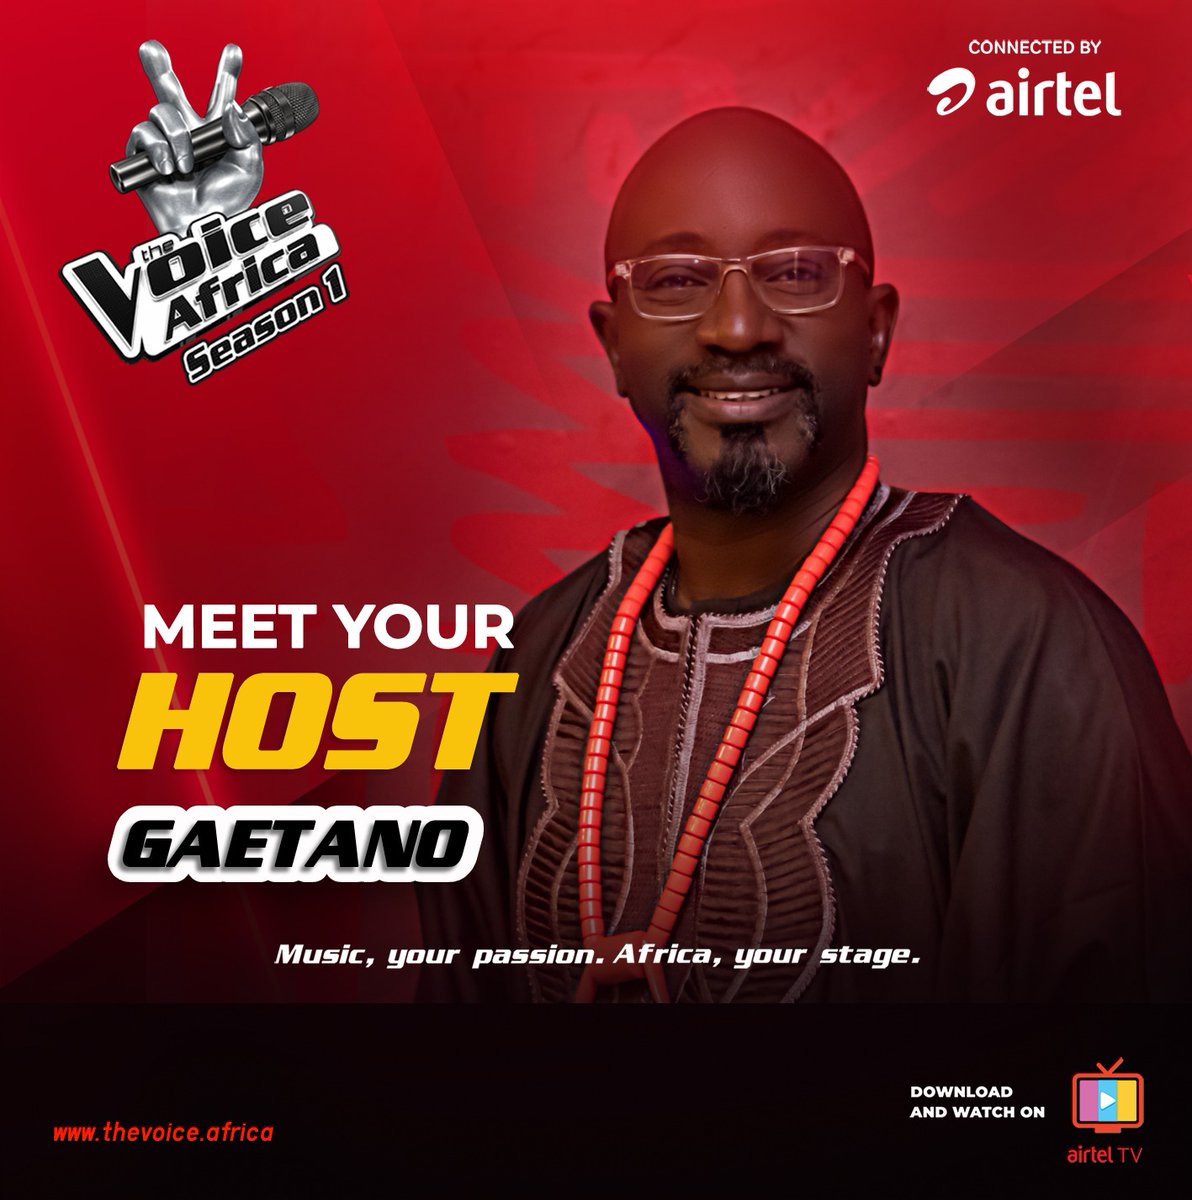 ITS OFFICIAL
Our very own @gaetanokagwa  is back on the continental stage as the host of #TheVoiceAfrica season 1
Join him this Sunday on @ntvuganda at 8PM as we meet the Coaches, and cheer #TeamUganda #ConnectedByAirtel @japhetaritho @Manoj5571 @Amitkapur75 @kamaunjorogeh